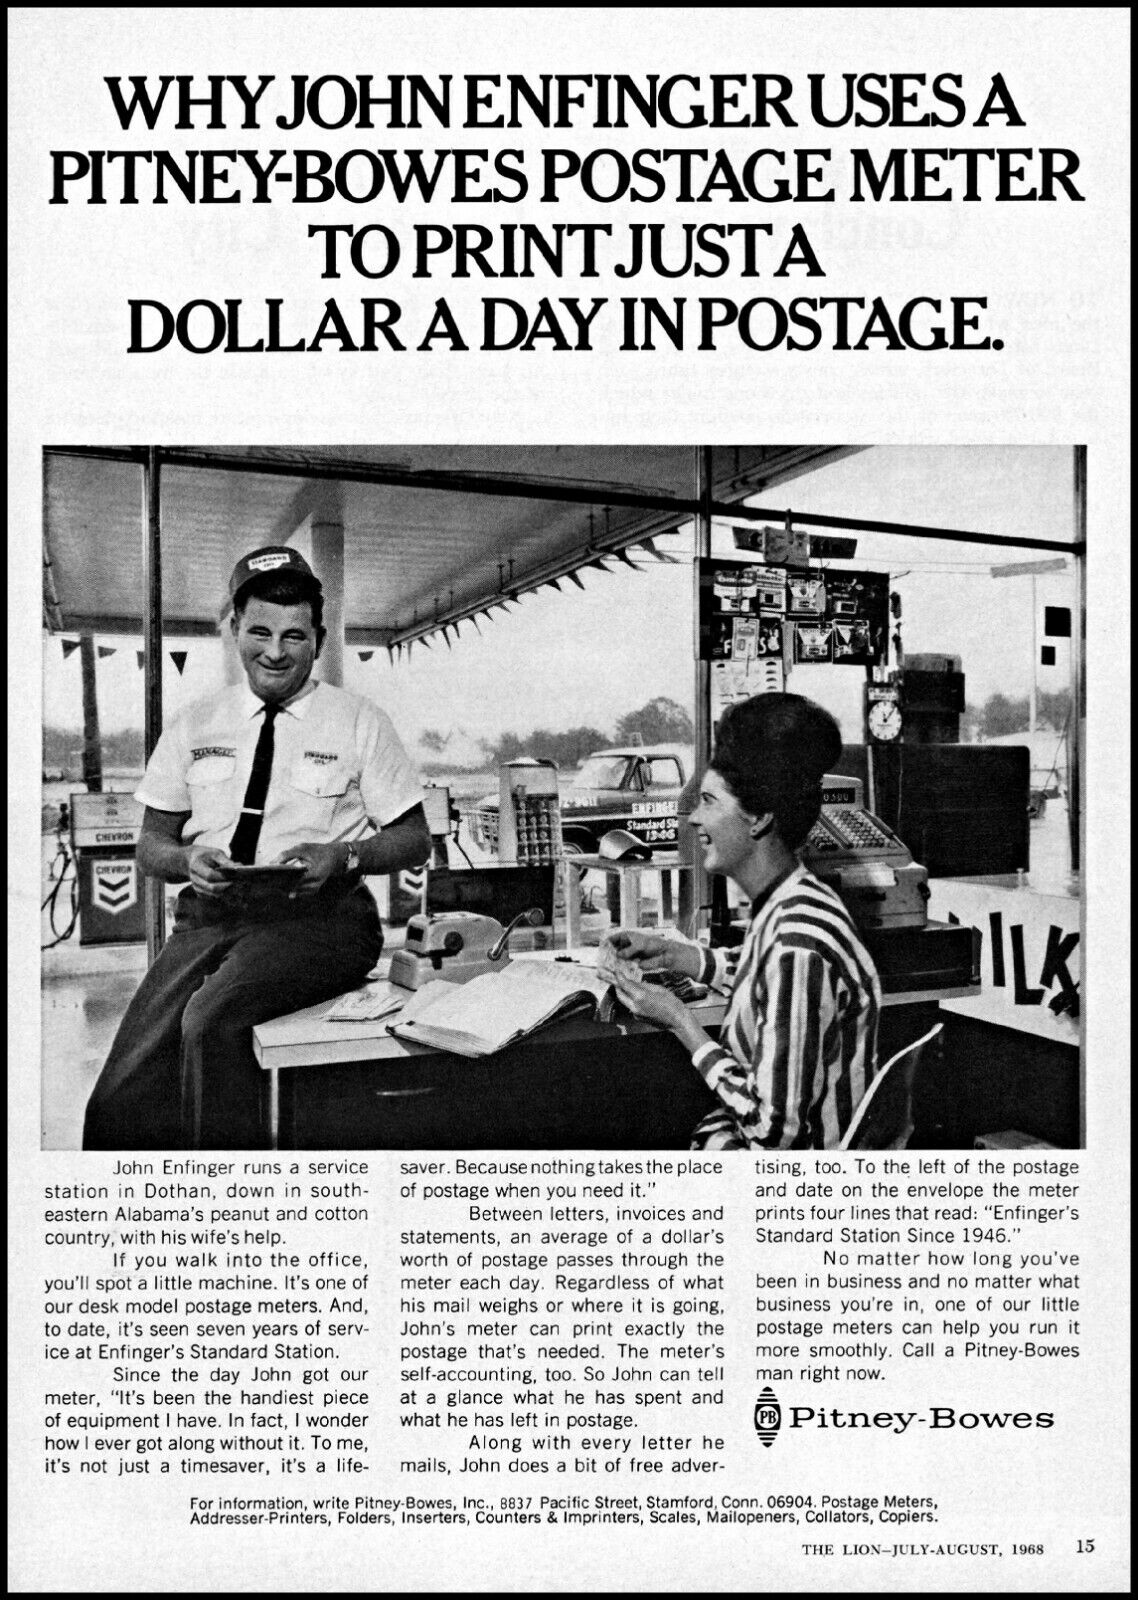 1968 John Enfinger Pitney-Bowes postage meter accountant photo print ad ads41